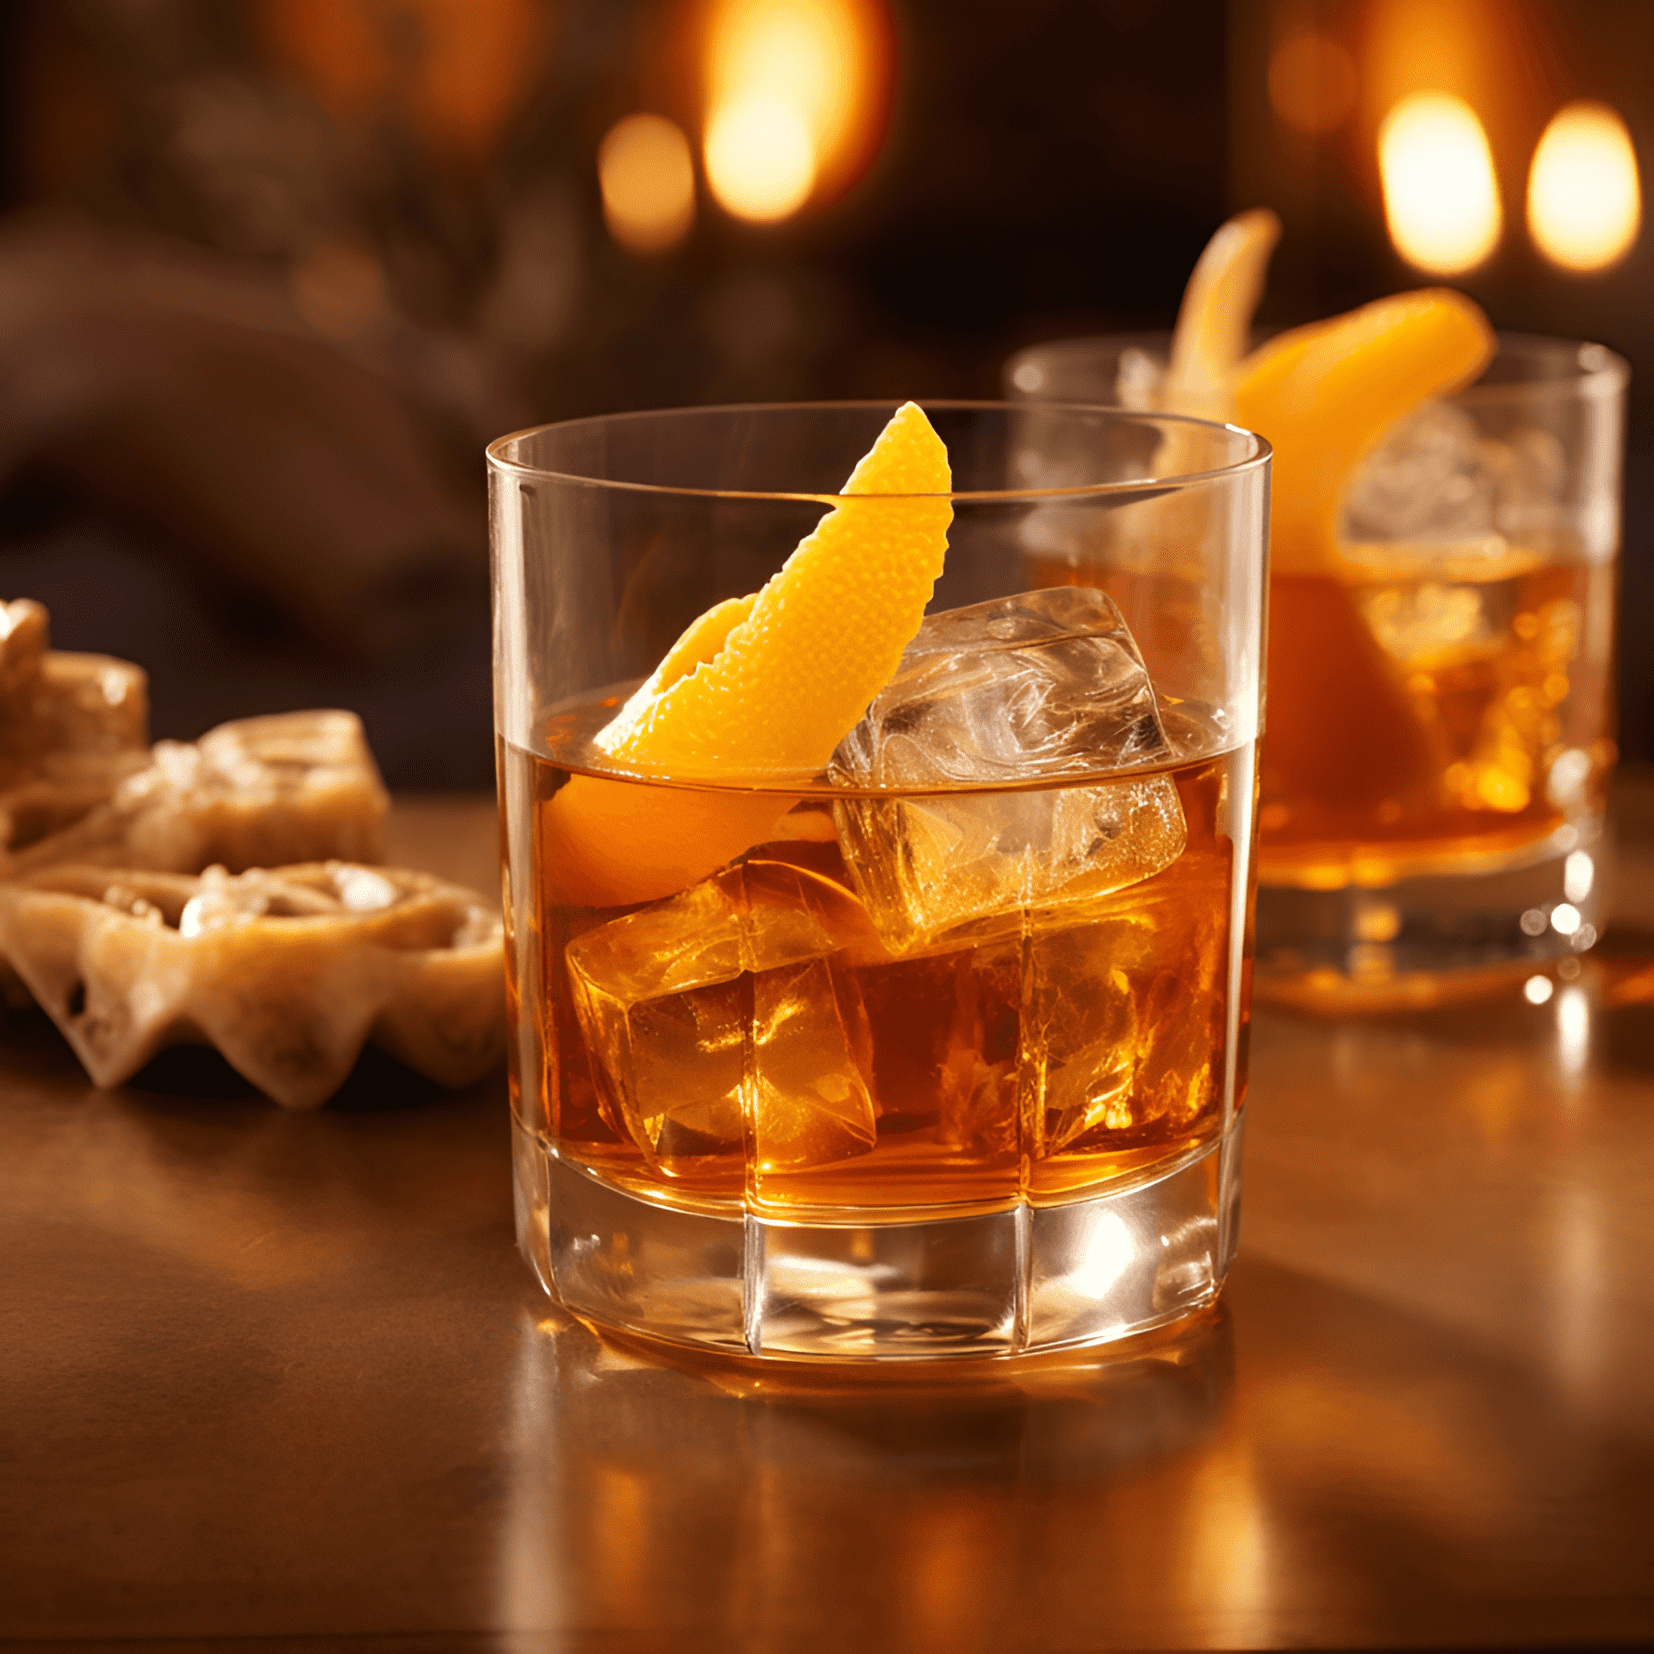 Woodford Reserve Cocktail Recipe - The Woodford Reserve cocktail is rich, smooth, and slightly sweet with a hint of bitterness. The flavors of the bourbon are complemented by the sweetness of the sugar and the brightness of the citrus, creating a well-balanced and complex taste profile.